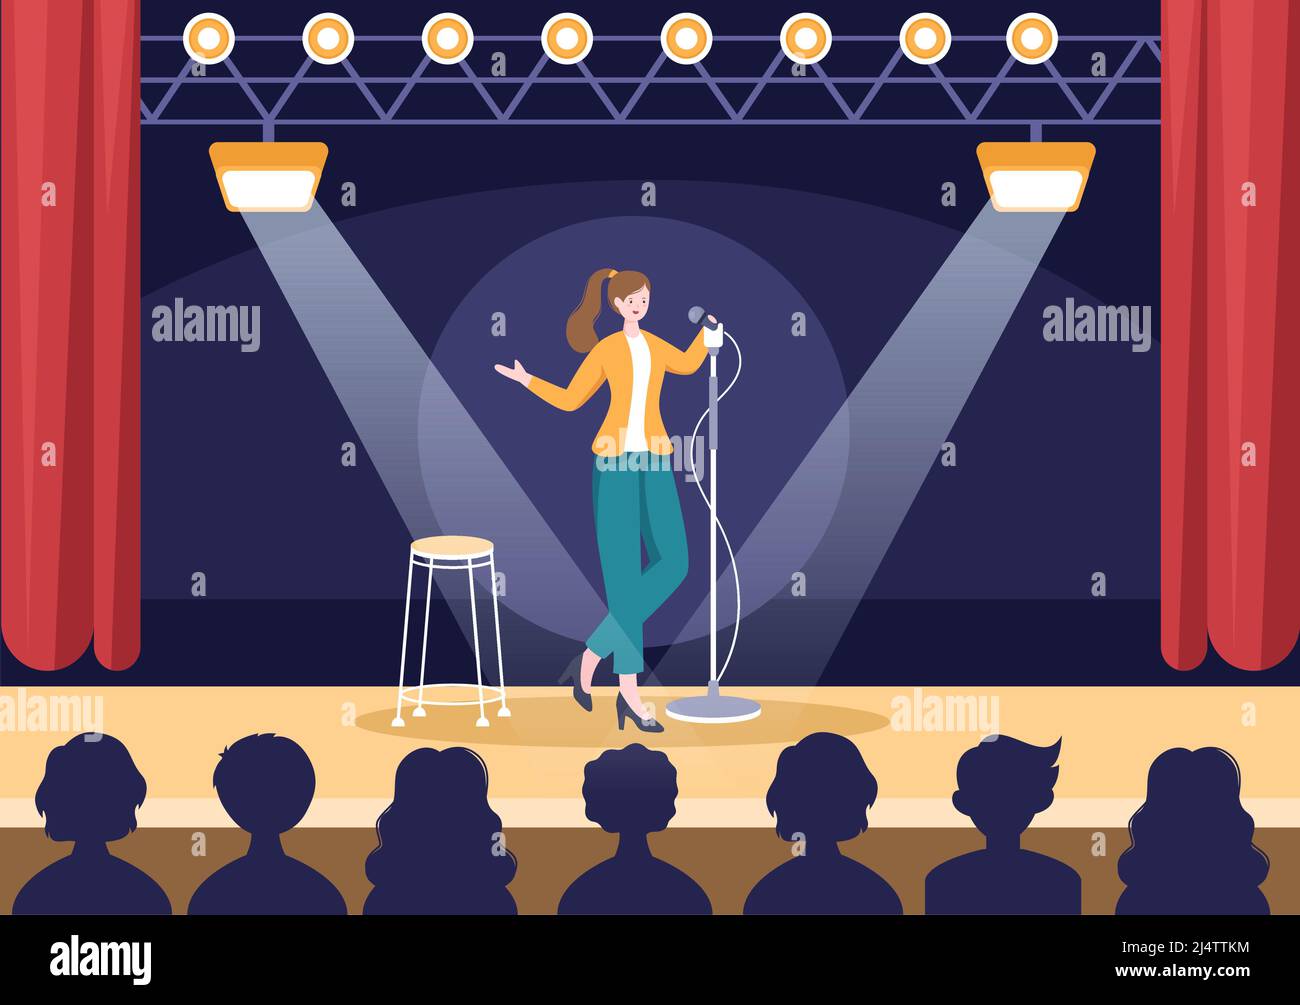 Stand Up Comedy Show Theater Scene with Red Curtains and Open Microphone to Comedian Performing on Stage in Flat Style Cartoon Illustration Stock Vector